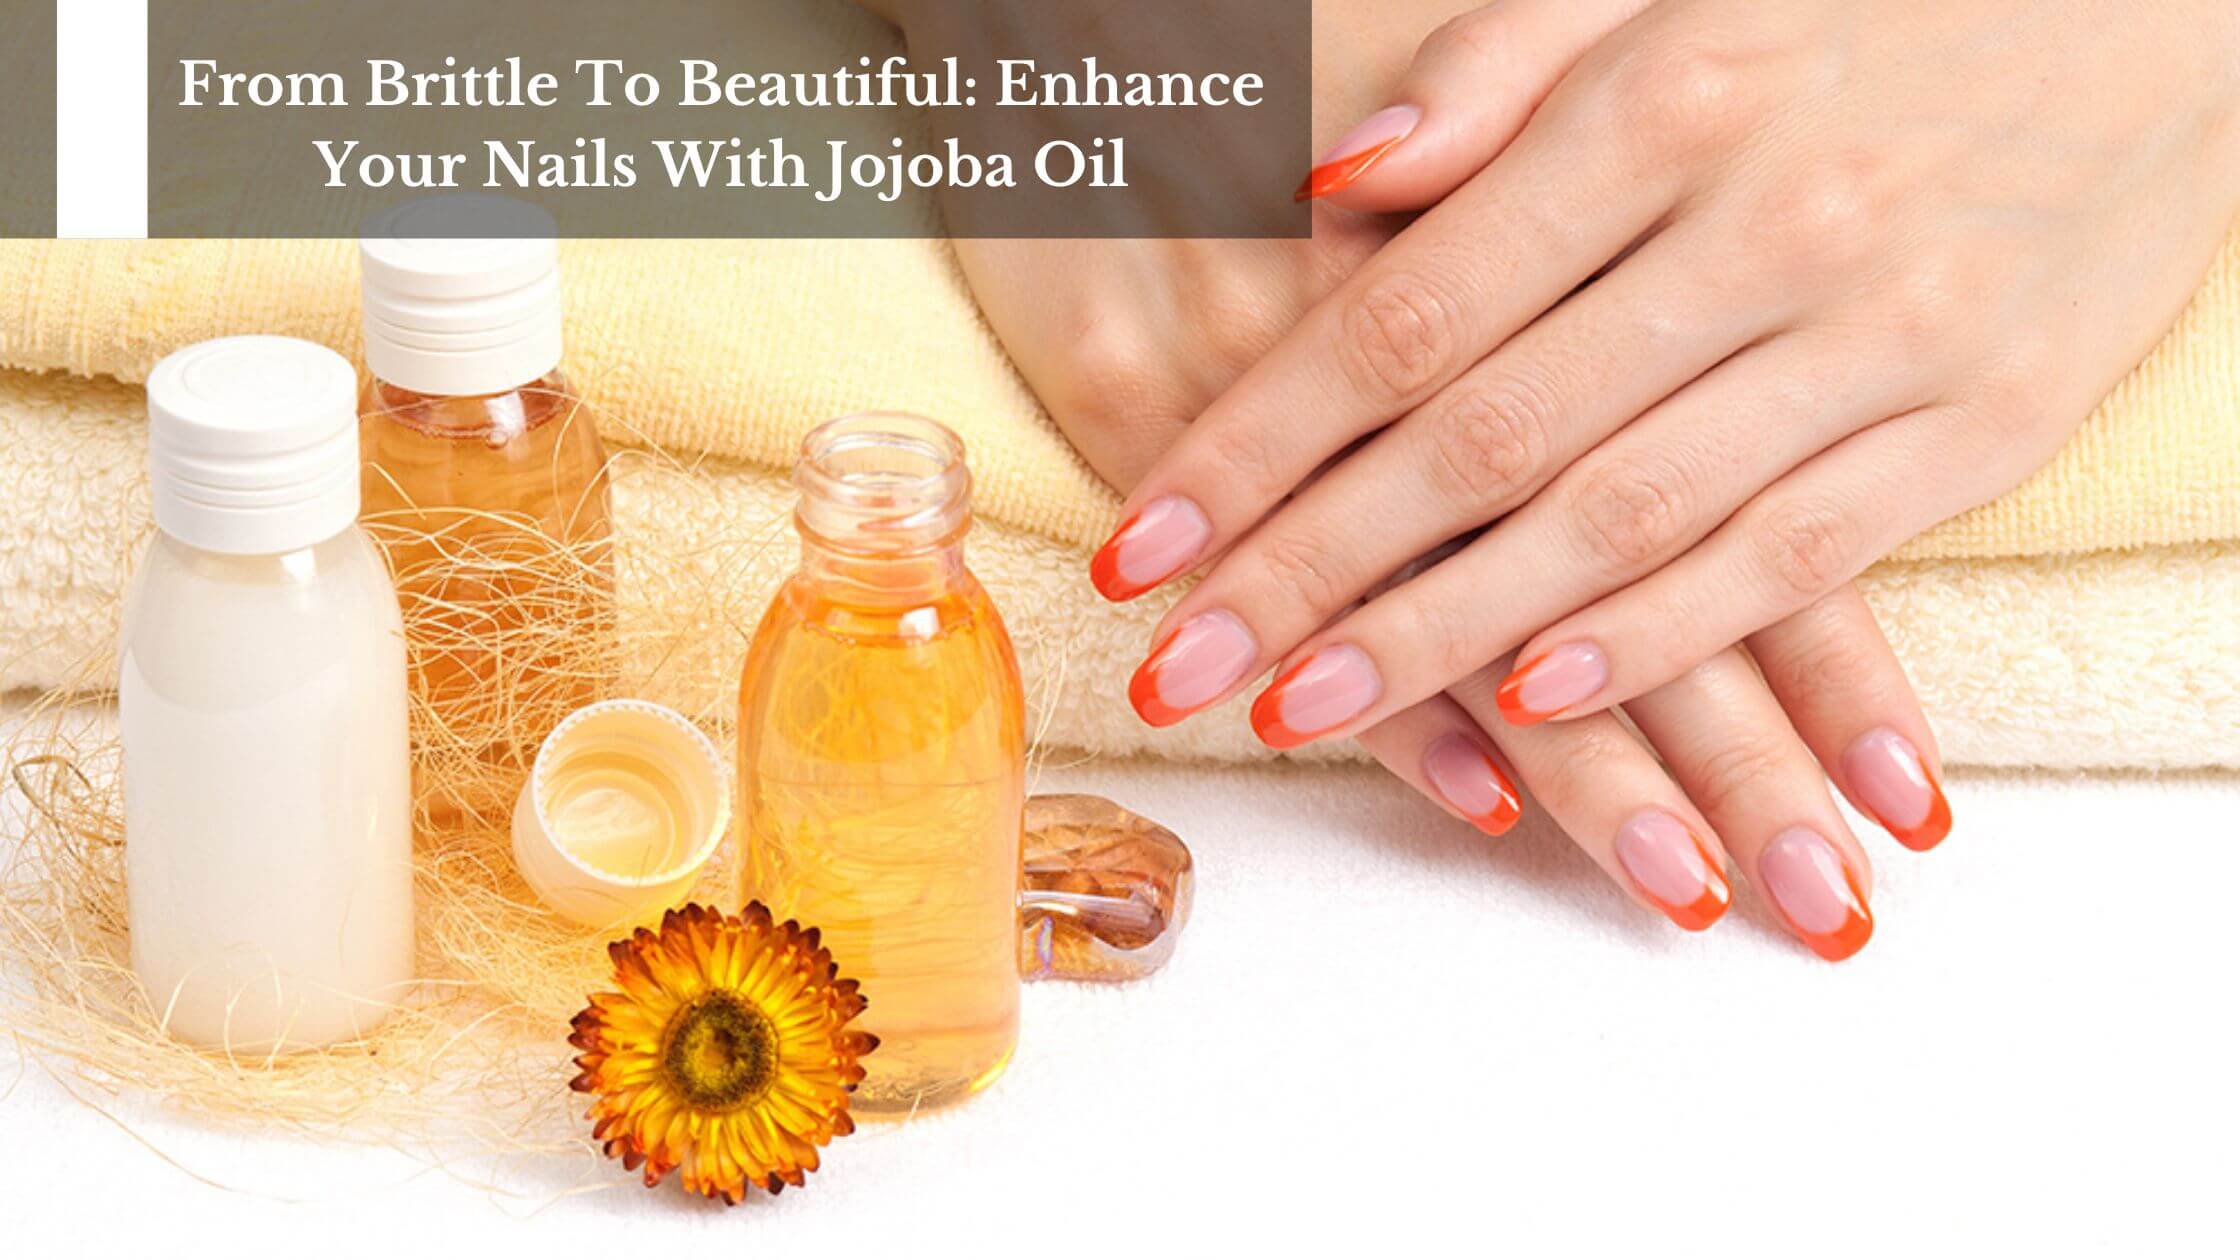 From Brittle To Beautiful: Enhance Your Nails With Jojoba Oil